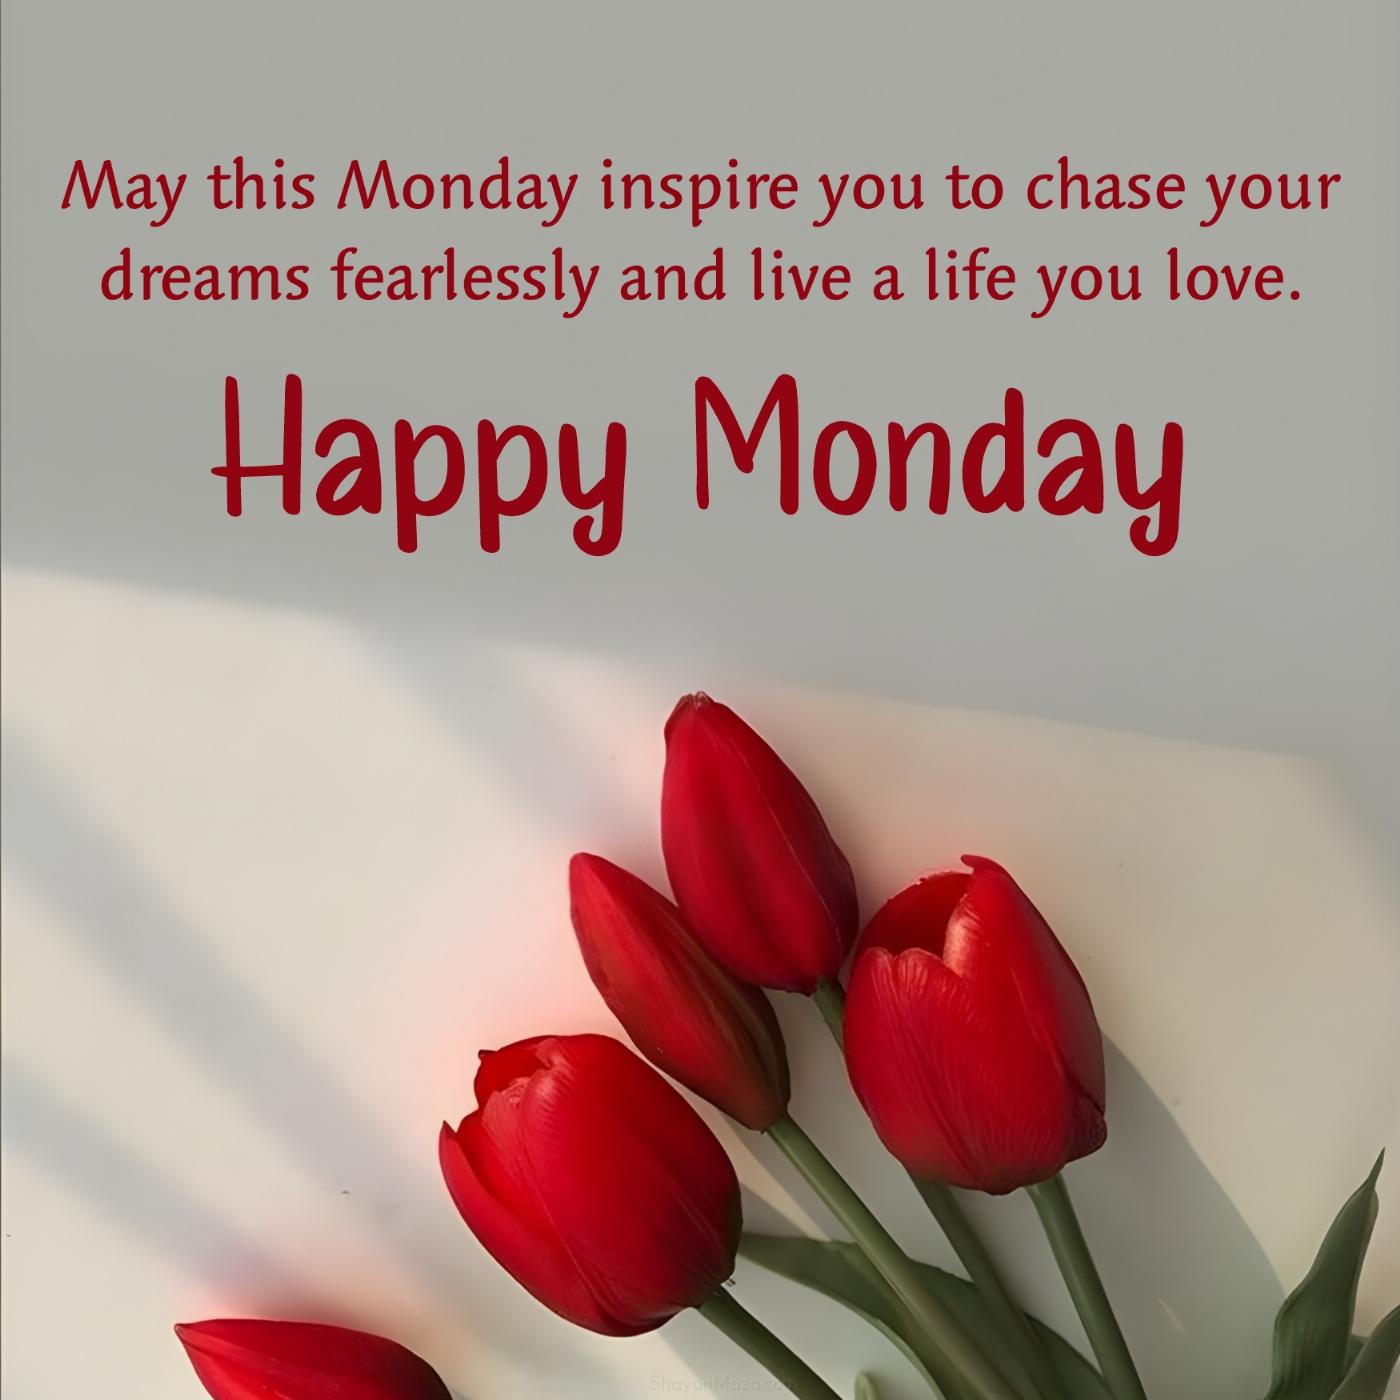 May this Monday inspire you to chase your dreams fearlessly